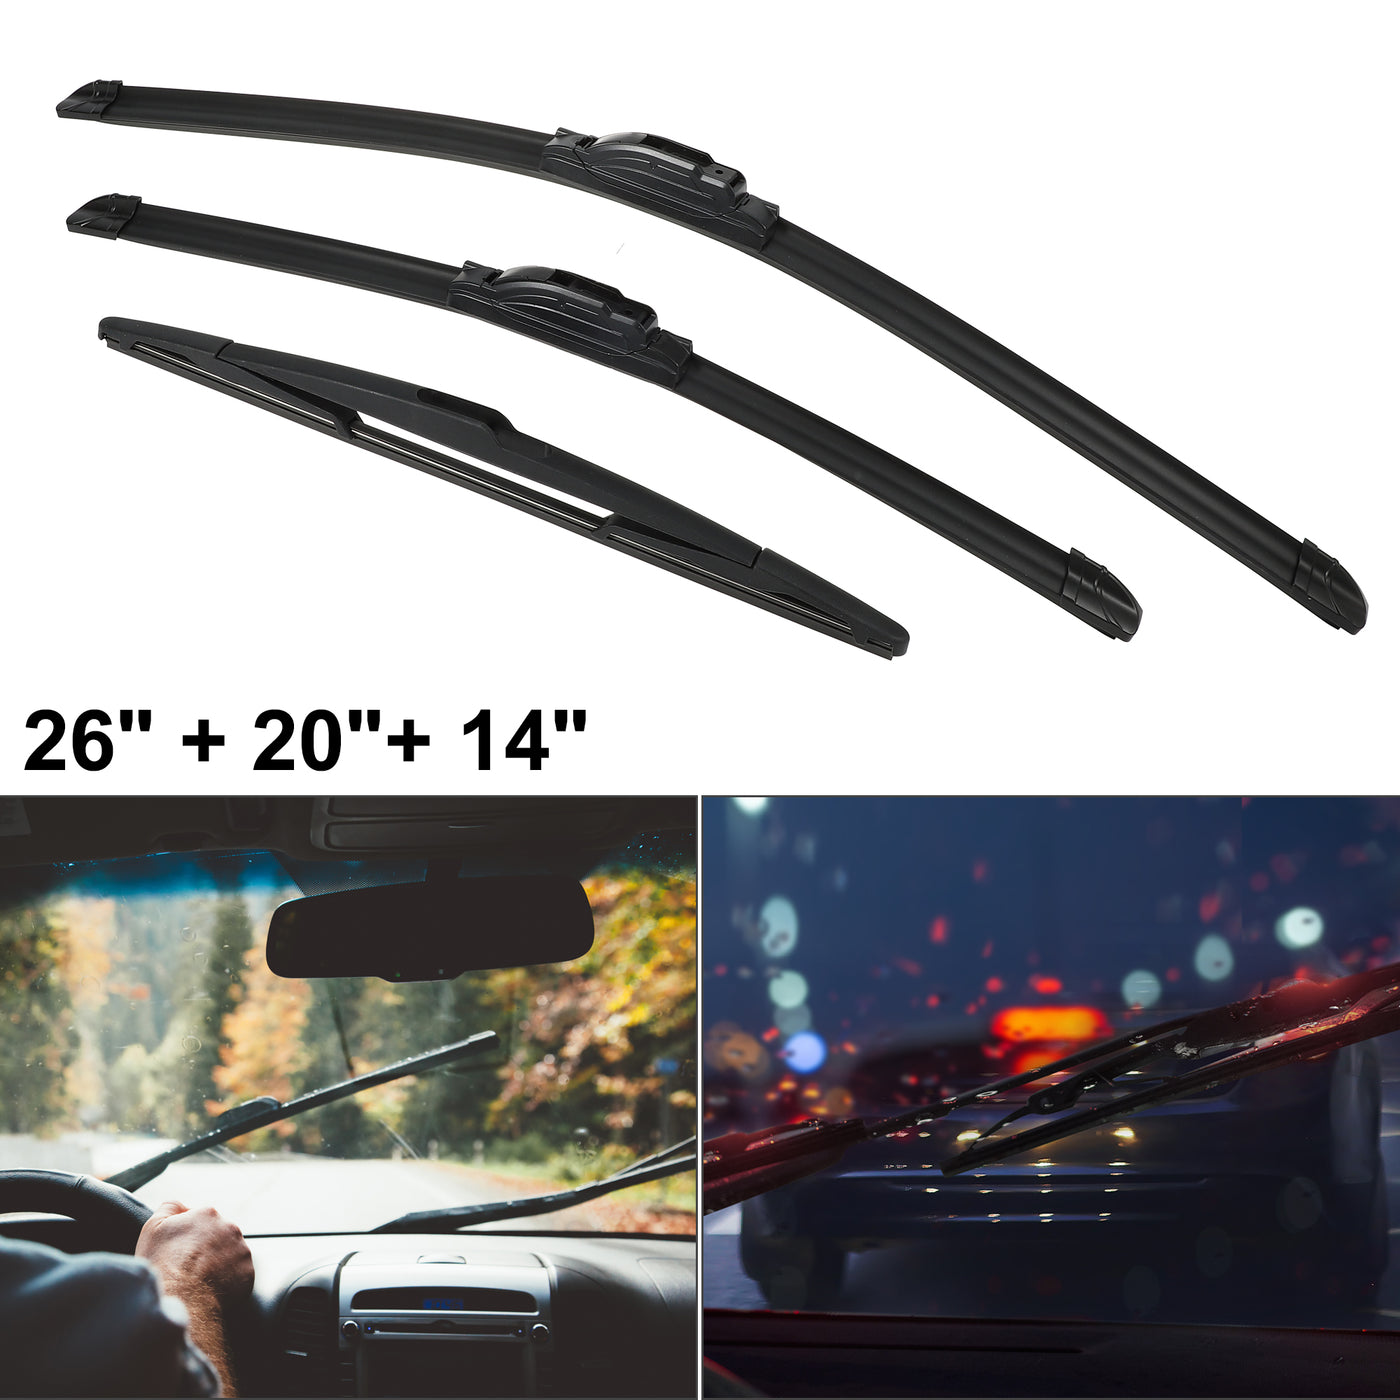 ACROPIX Front Rear Windshield Wiper Blade Set Car Wiper Blade Fit for Ford Edge 2007-2014 - Pack of 3 Black